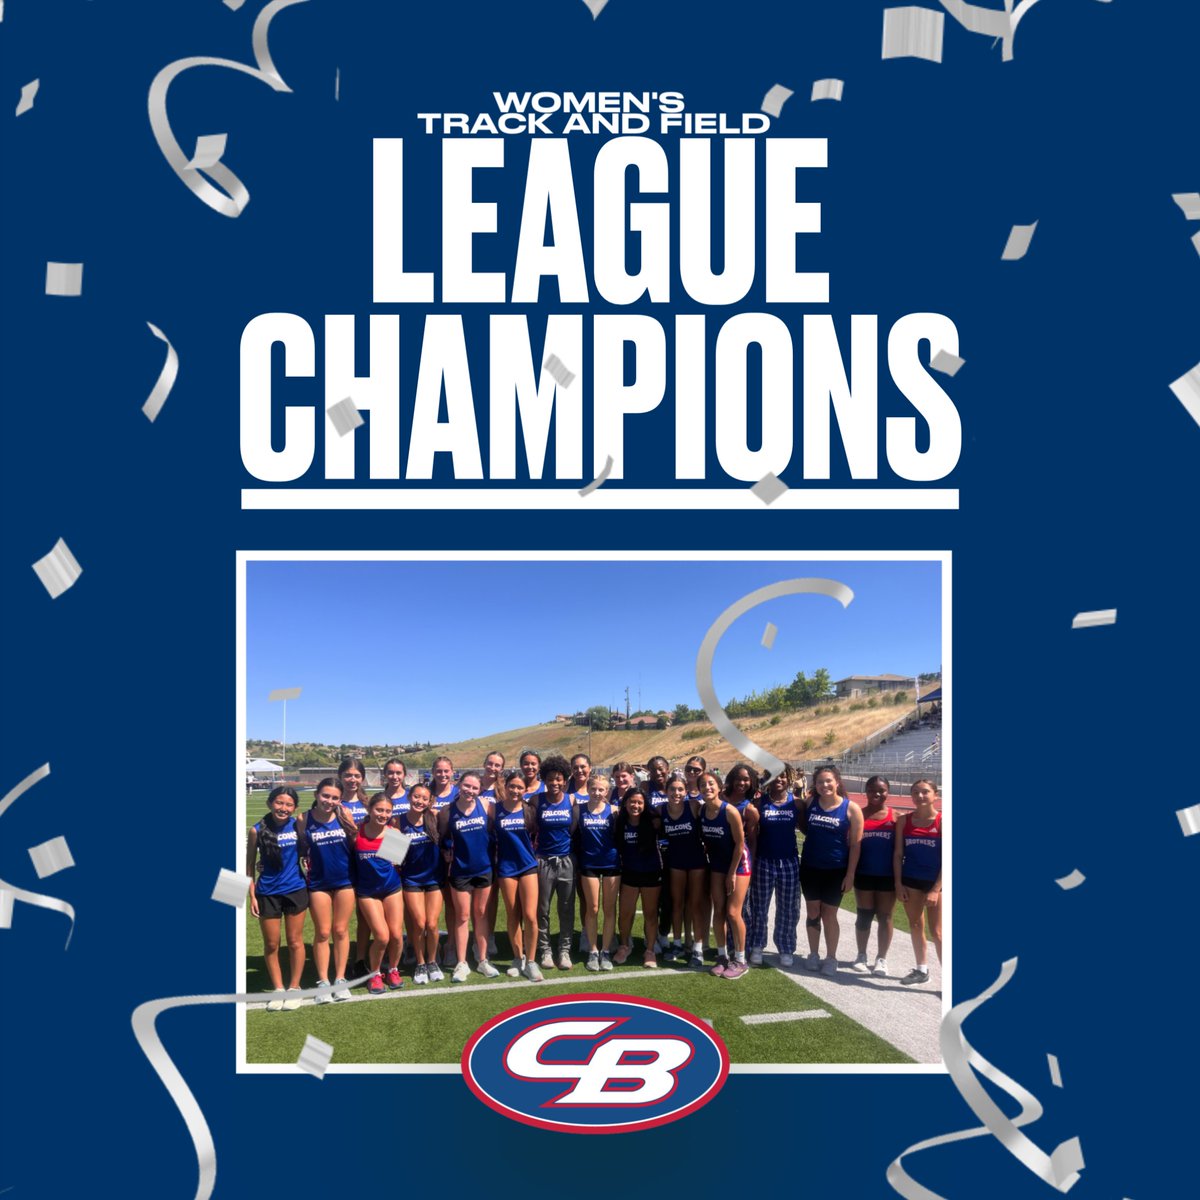 Congratulations to our Women's Track and Field team for winning their 2nd straight Capital Athletic League championship! This is also their third championship in four years! They will look to repeat as D3 Champions next week! #GoFalcons